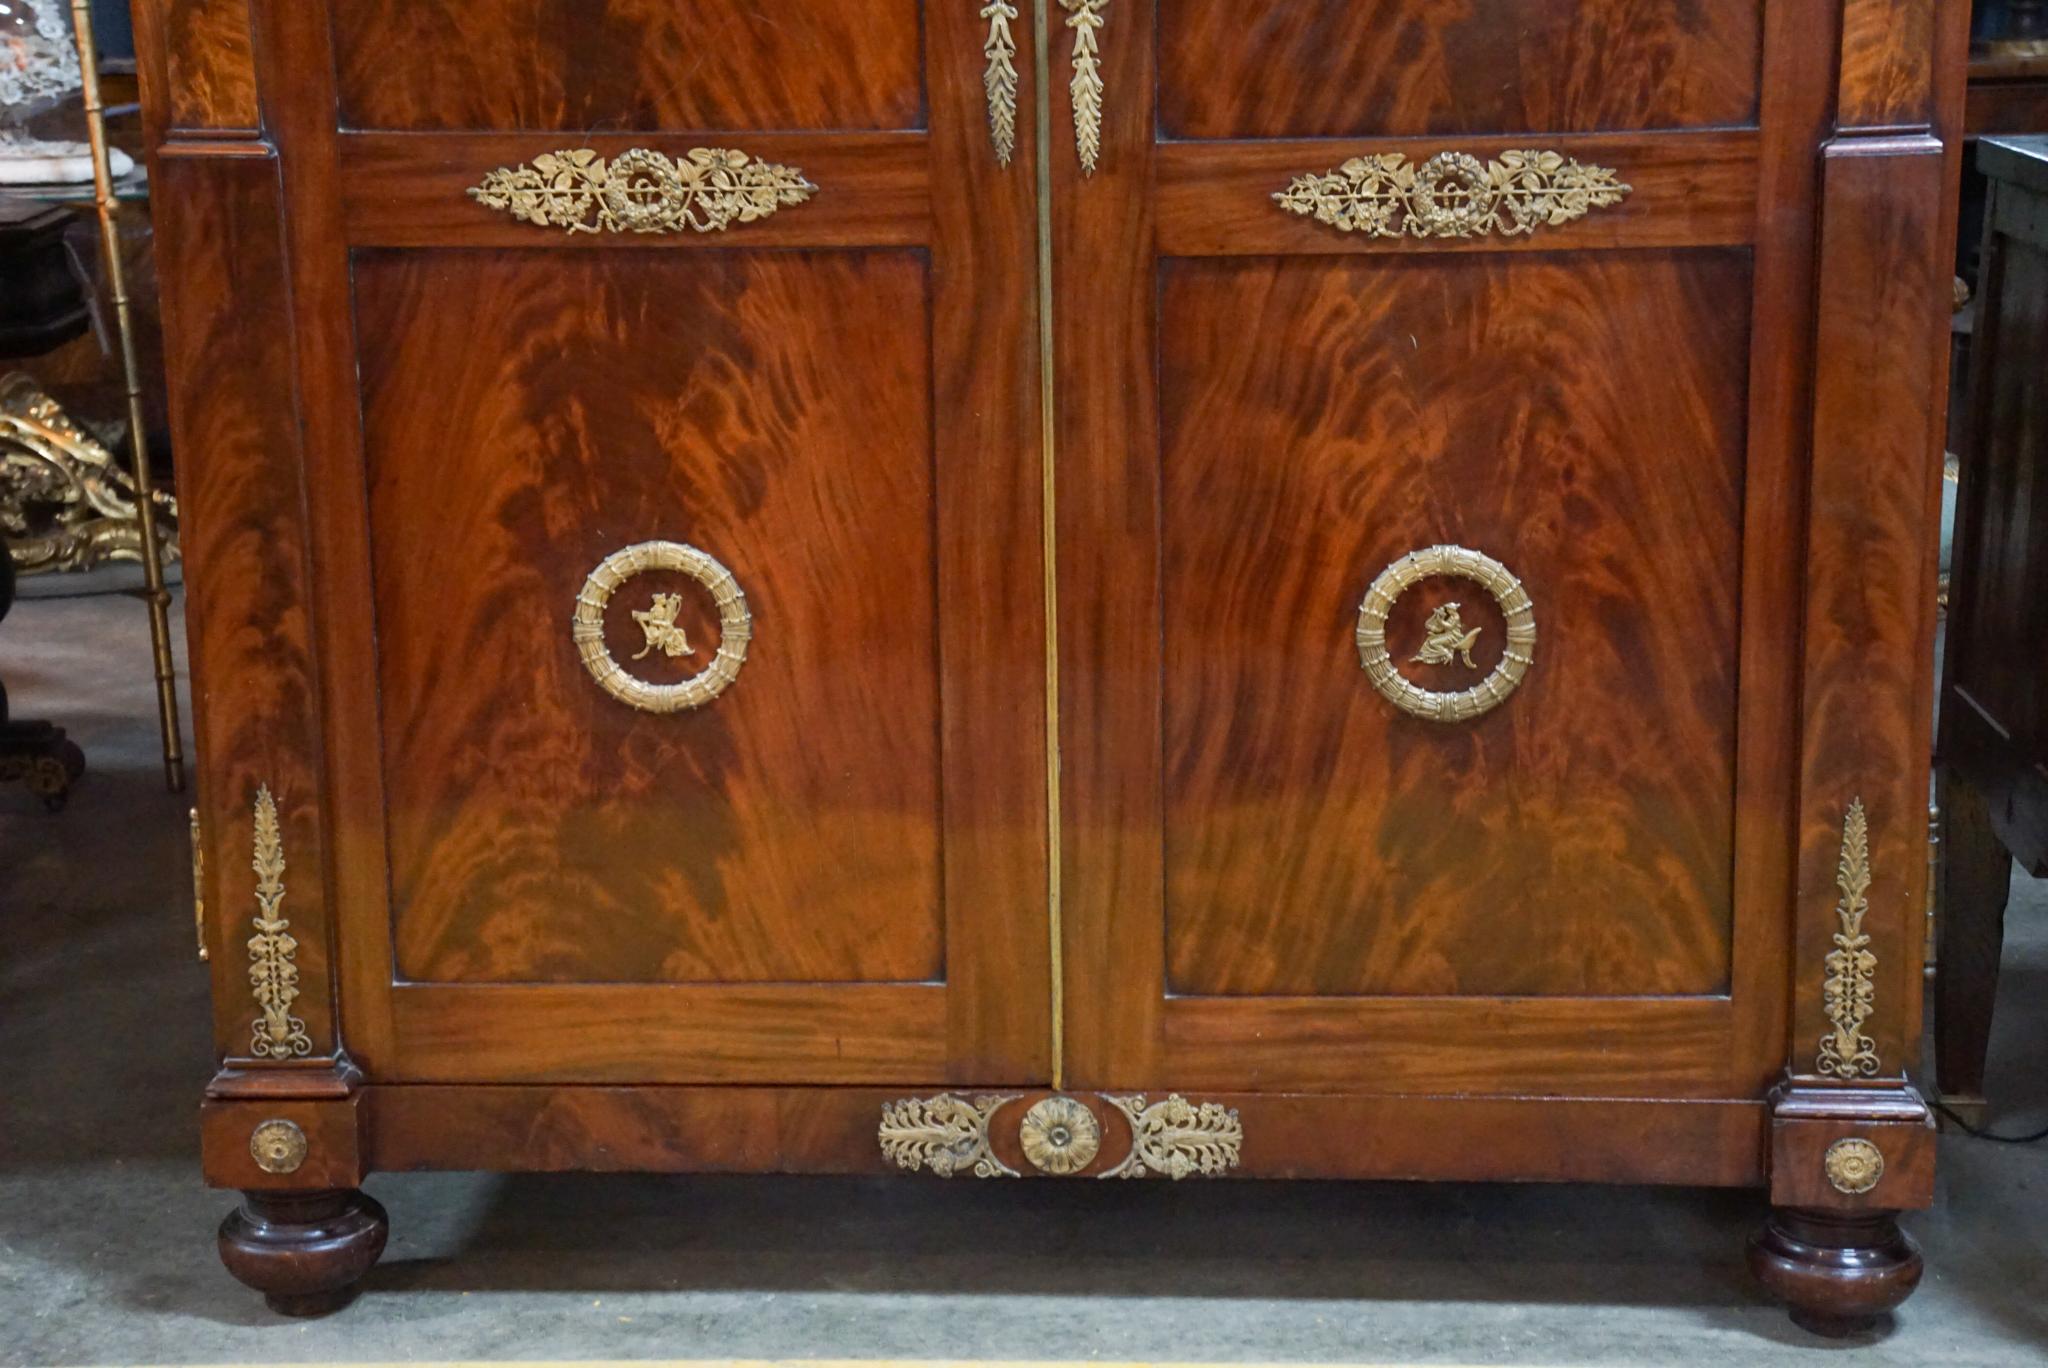 Empire Revival French Empire Style Late 19th c Wardrobe in the Manner of Maison Krieger For Sale